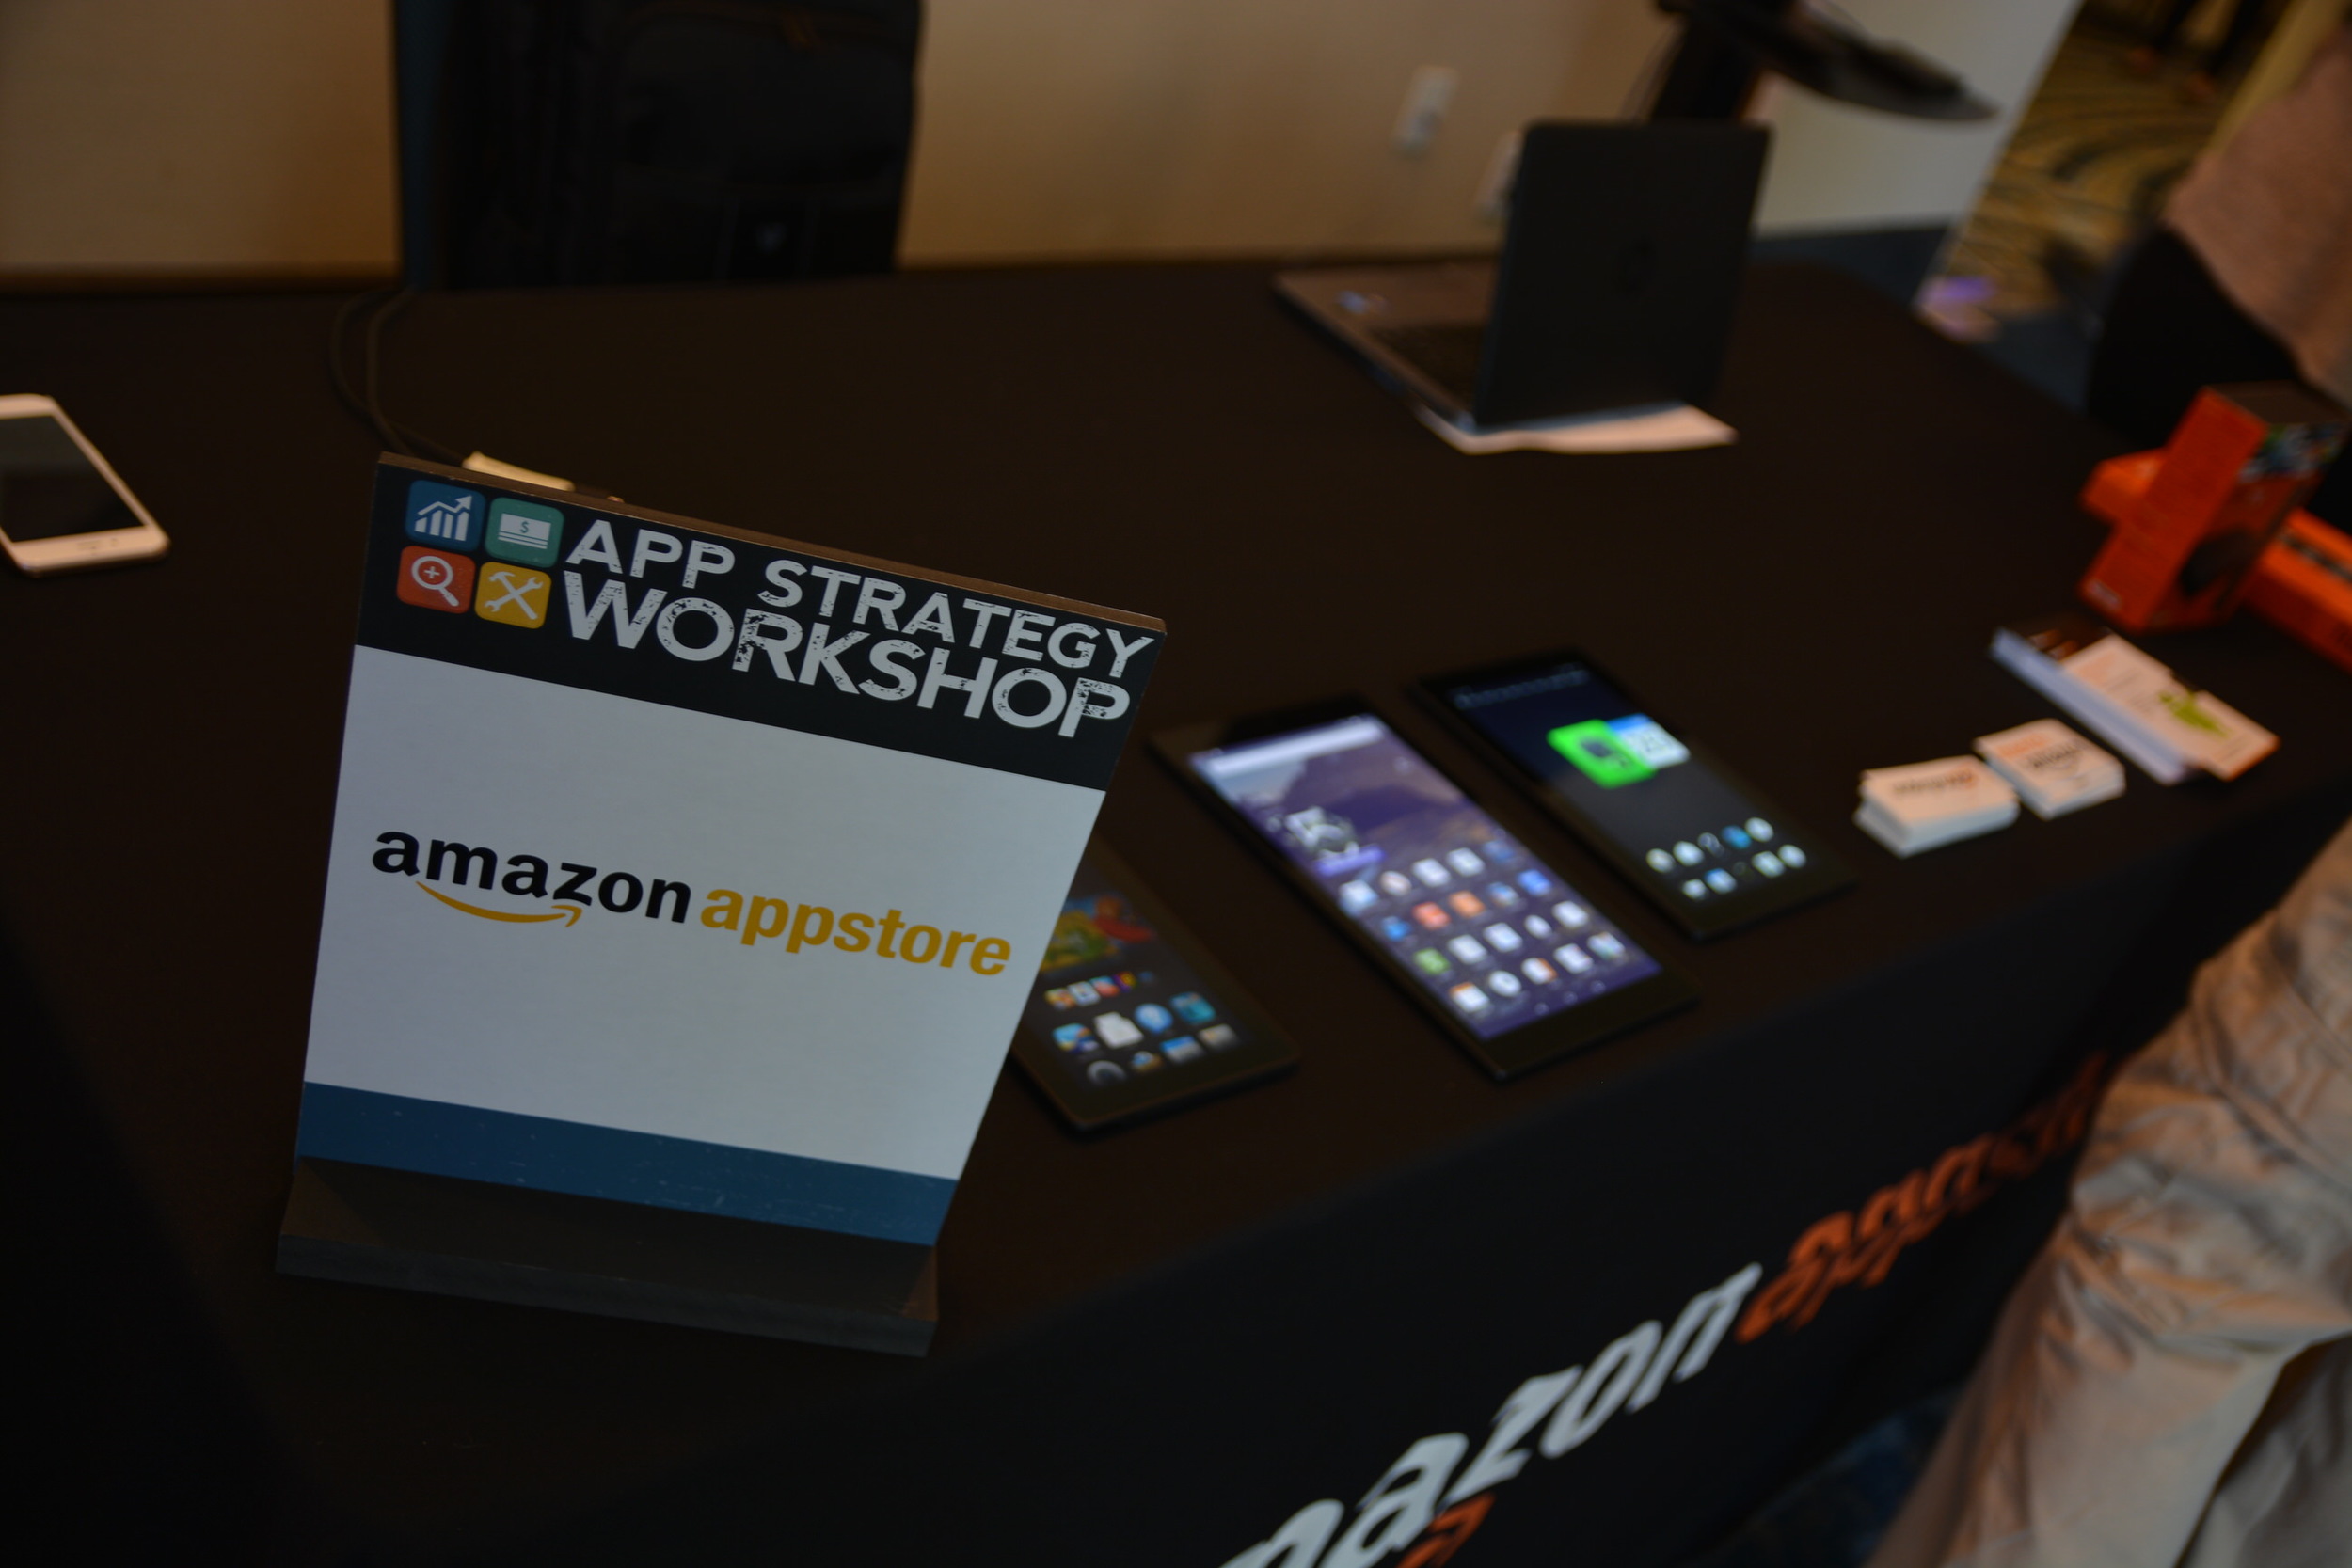 The Amazon App store was there to share all of their products too